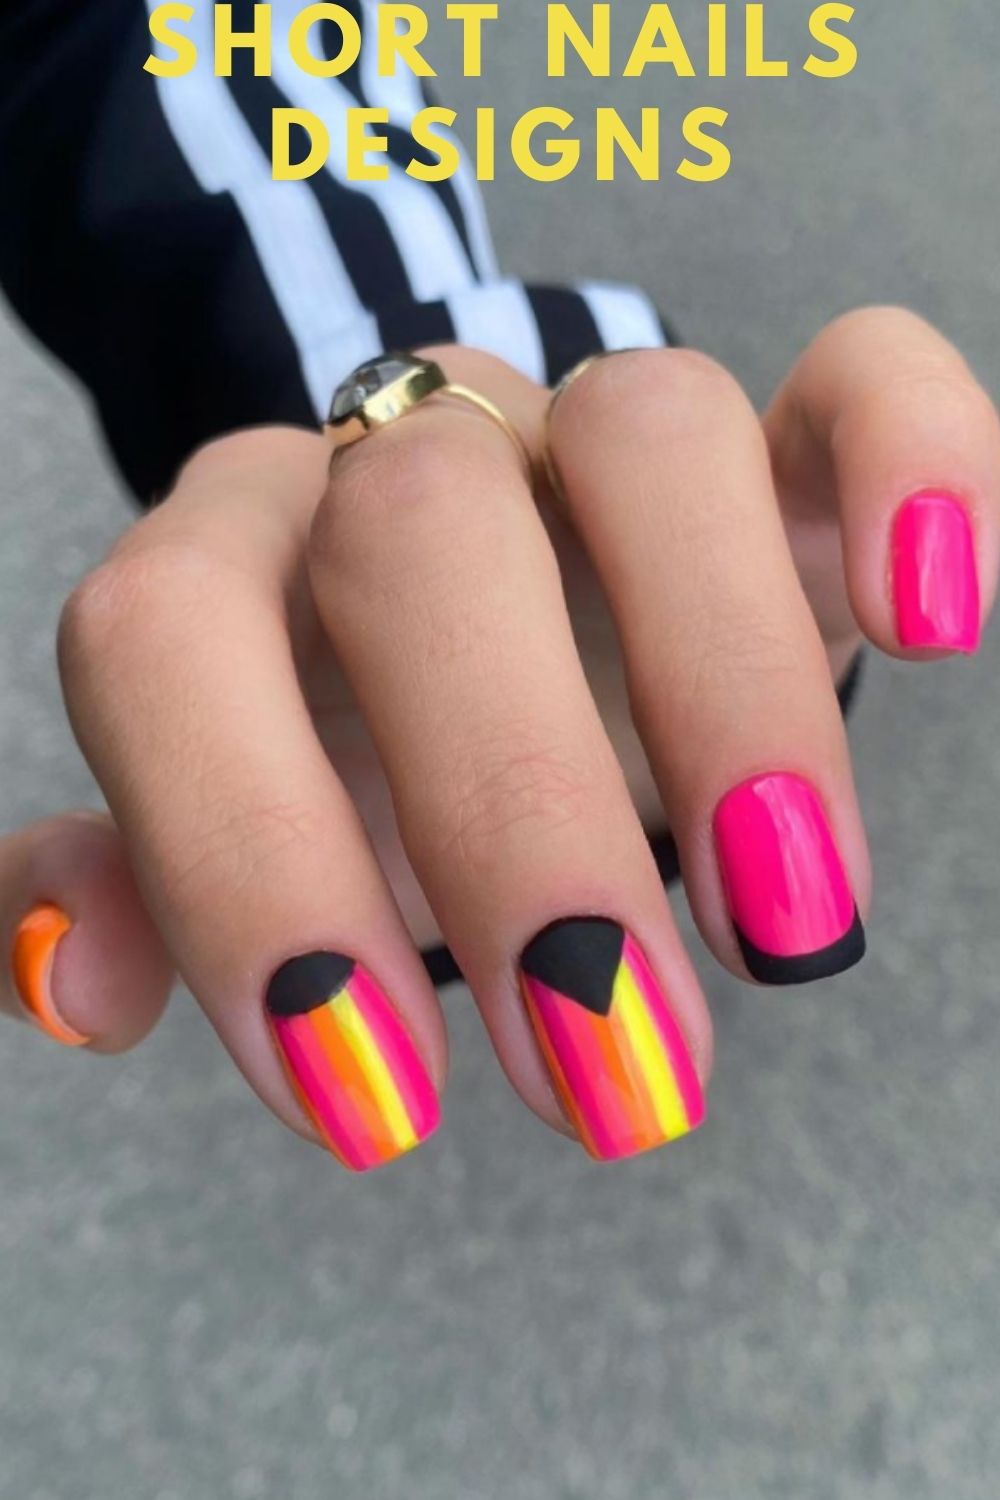 Nails 2021 trends spring